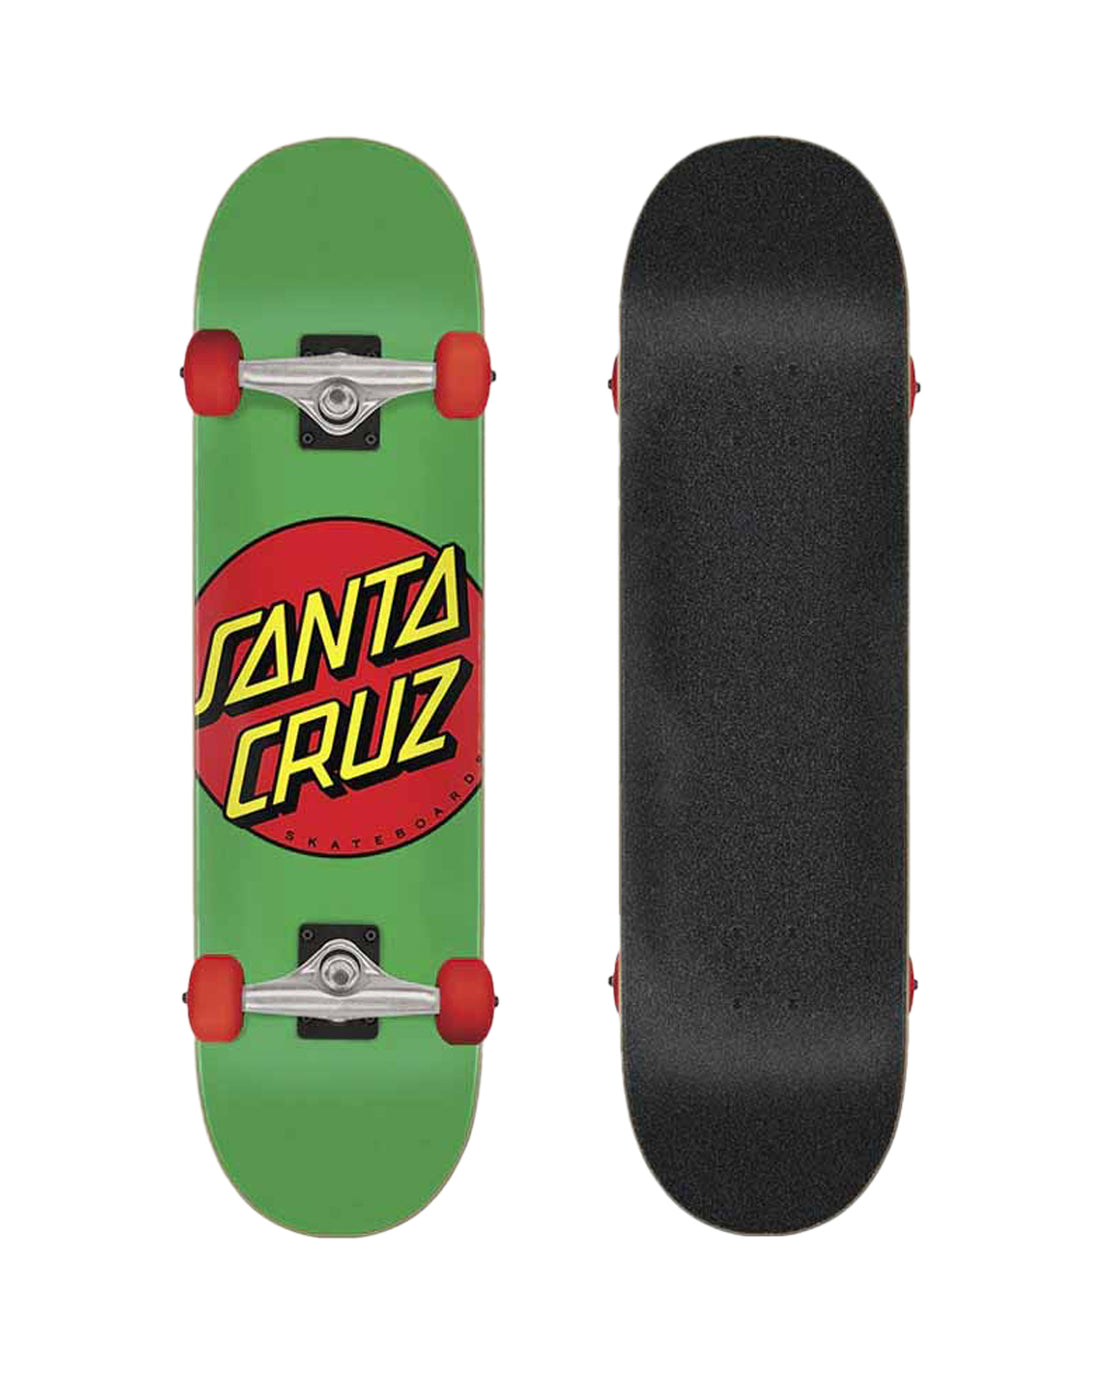 SANTA CRUZ COMPLETES Classic Dot Mid  Sk8 Completes 7.80in x 31.00in